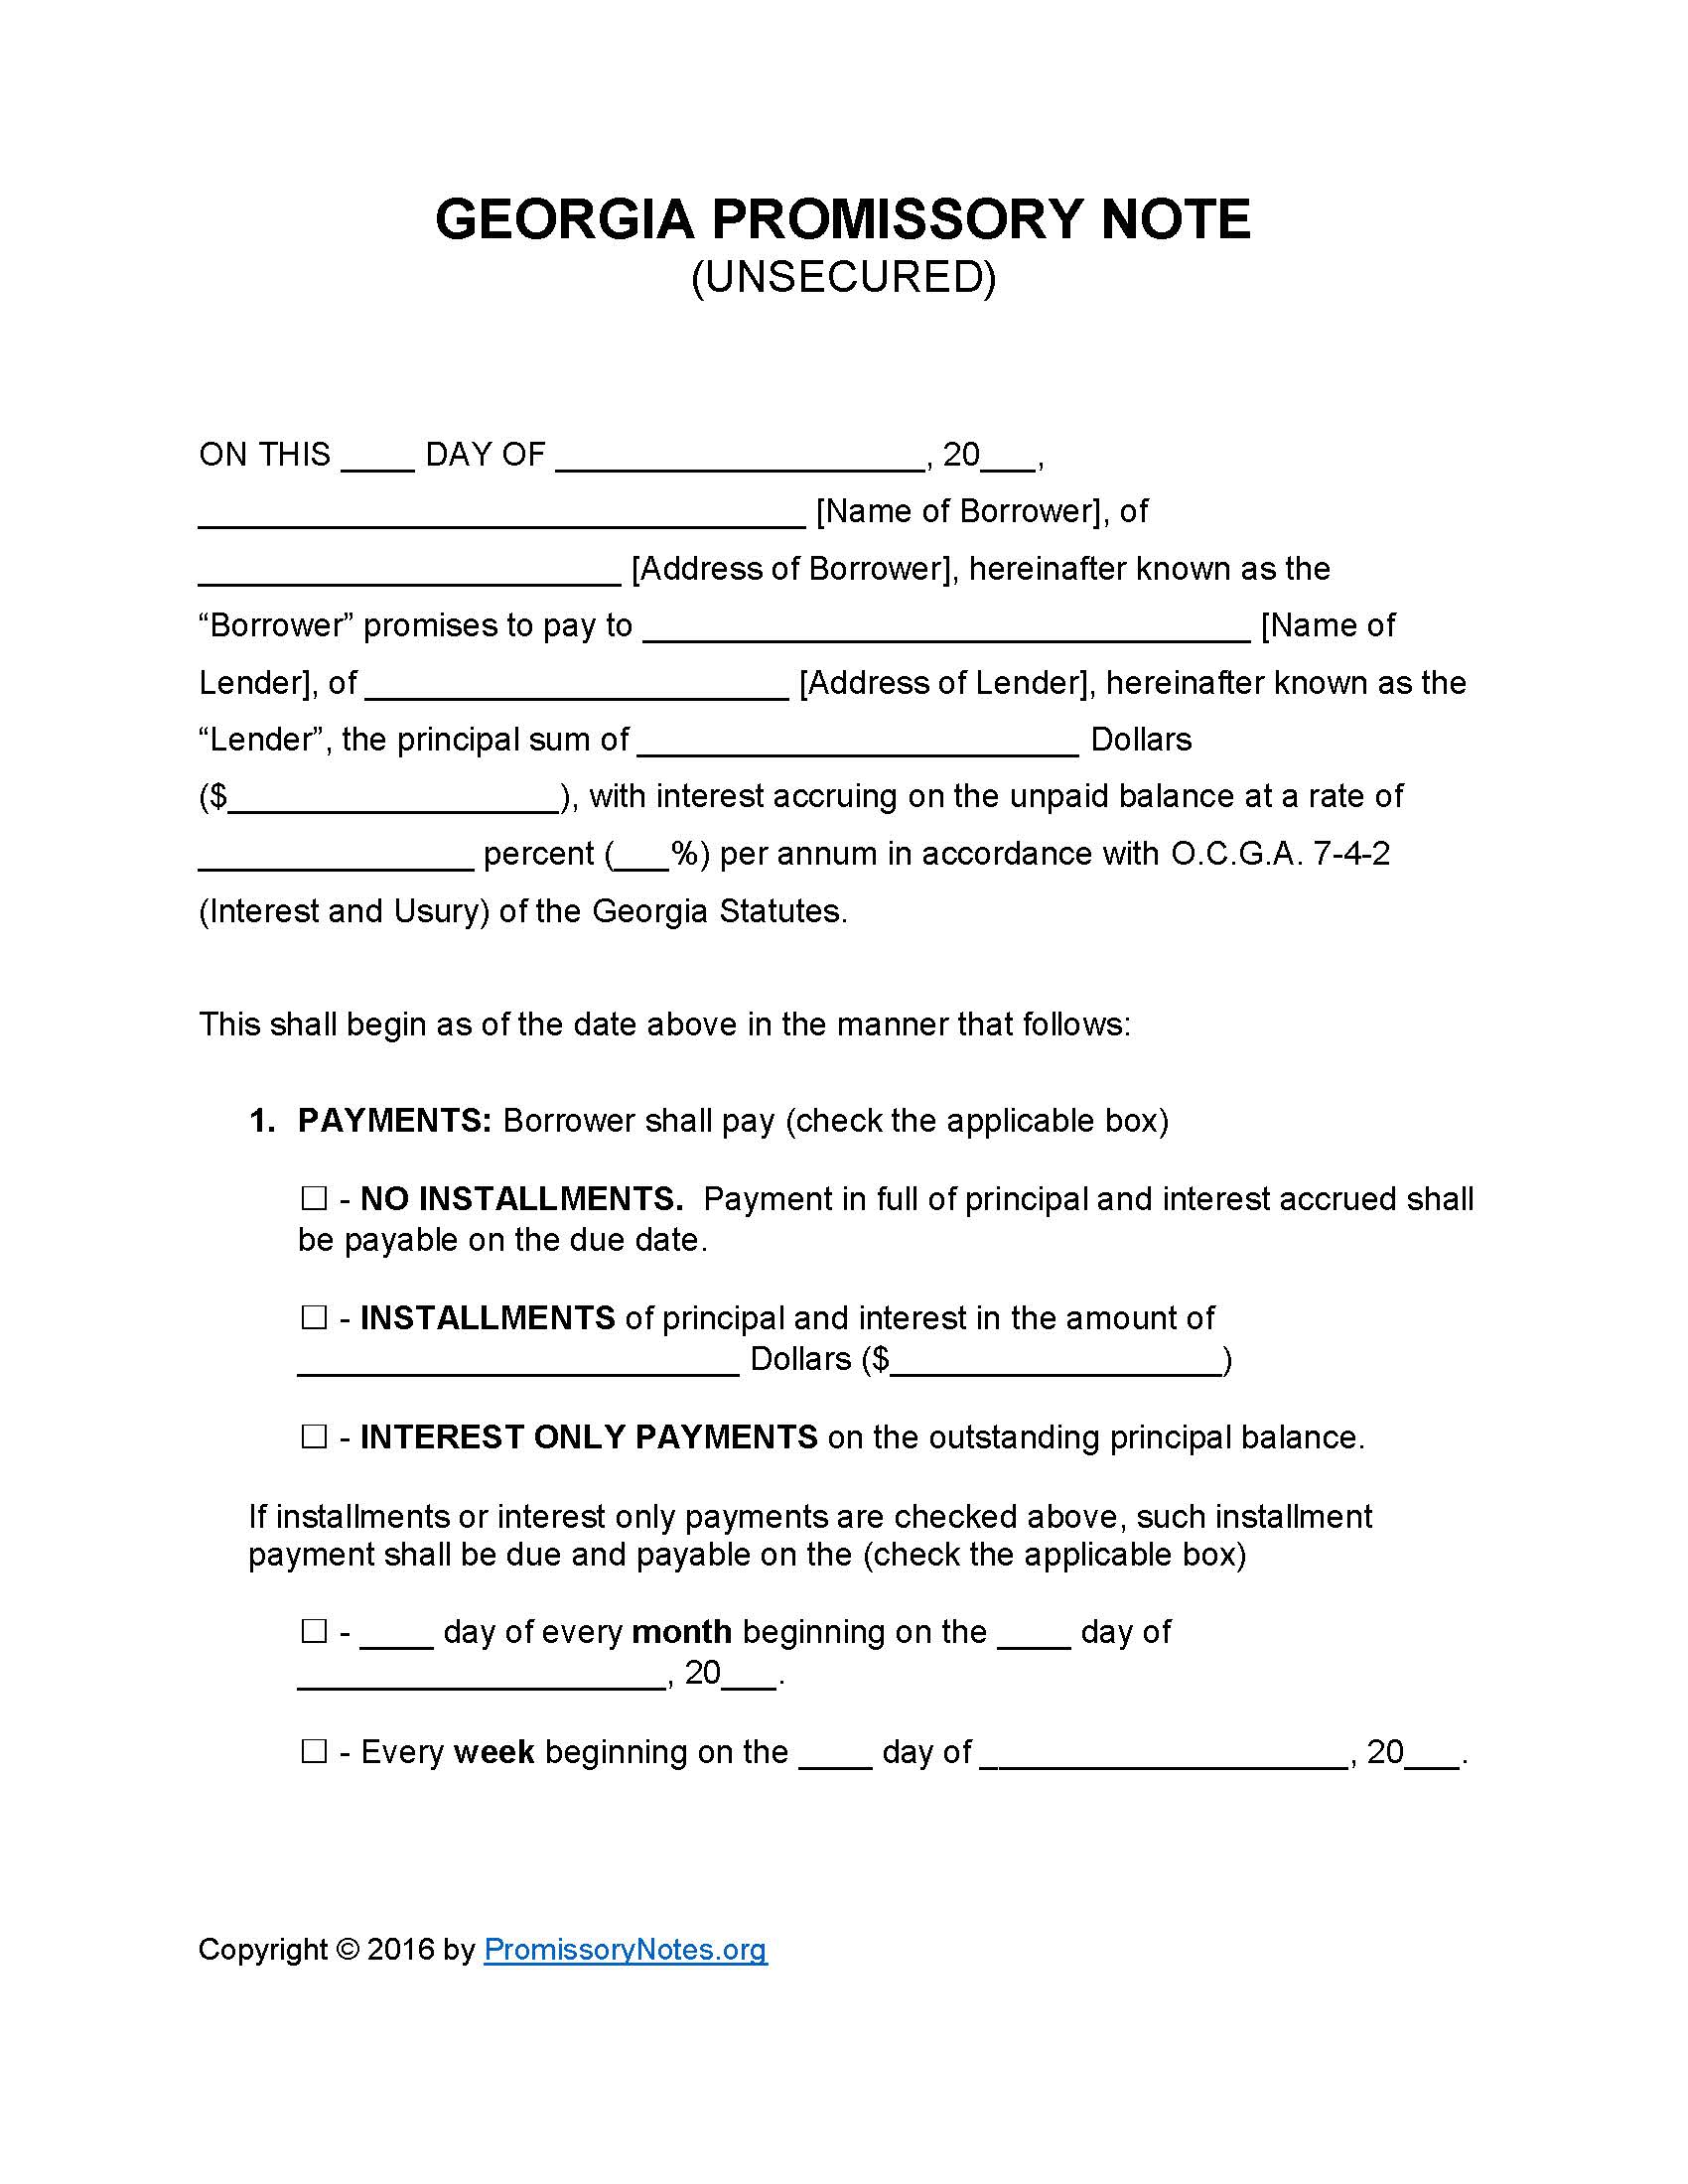 Unsecured Promissory Note Template Promissory Notes